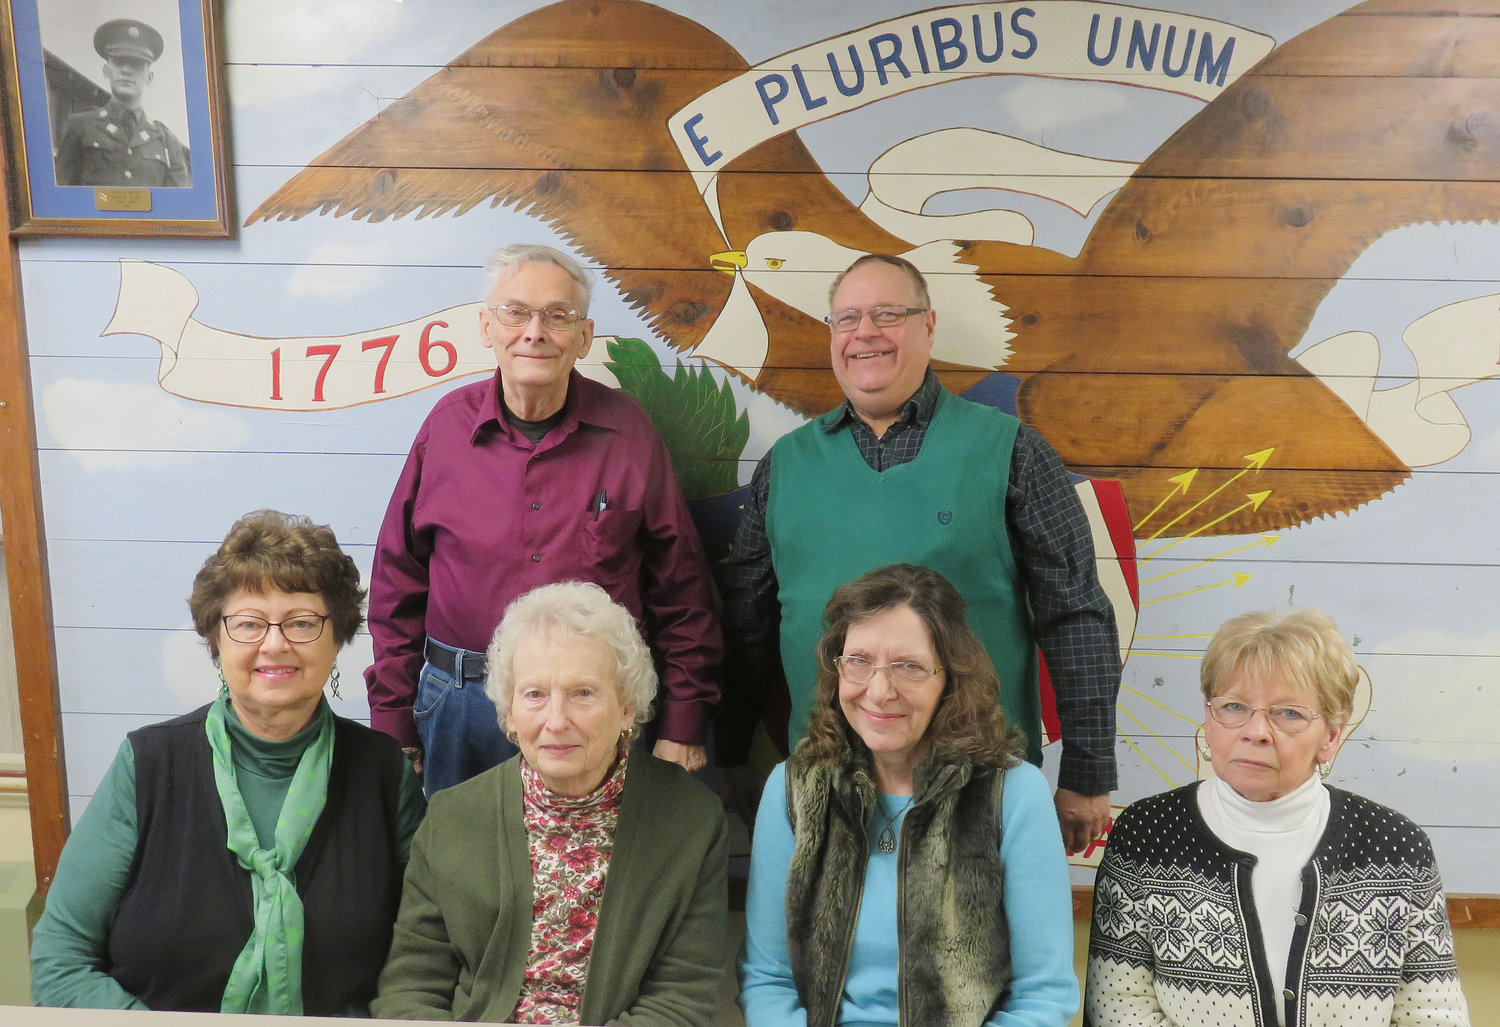 Pictured are the new officers of the Oriska Valley Seniors for 2022. Meetings are held the first Thursday of each month at the American Legion in Oriskany Falls at 1 p.m. with the exception of May, August and December luncheon meetings held off site. Anyone interested in joining the Club may contact Mike Silliman at 315-841-8199. Pictured: Front Row, Mabel Silliman, Programs and Bus Trips Coordinator; Gladys Jaquay, Sunshine Lady; Suzette Hayward, Secretary; Bethany Winner; Vice President Back Row:  Mike Silliman, Treasurer & Web Master; Doug Lopesz, President.